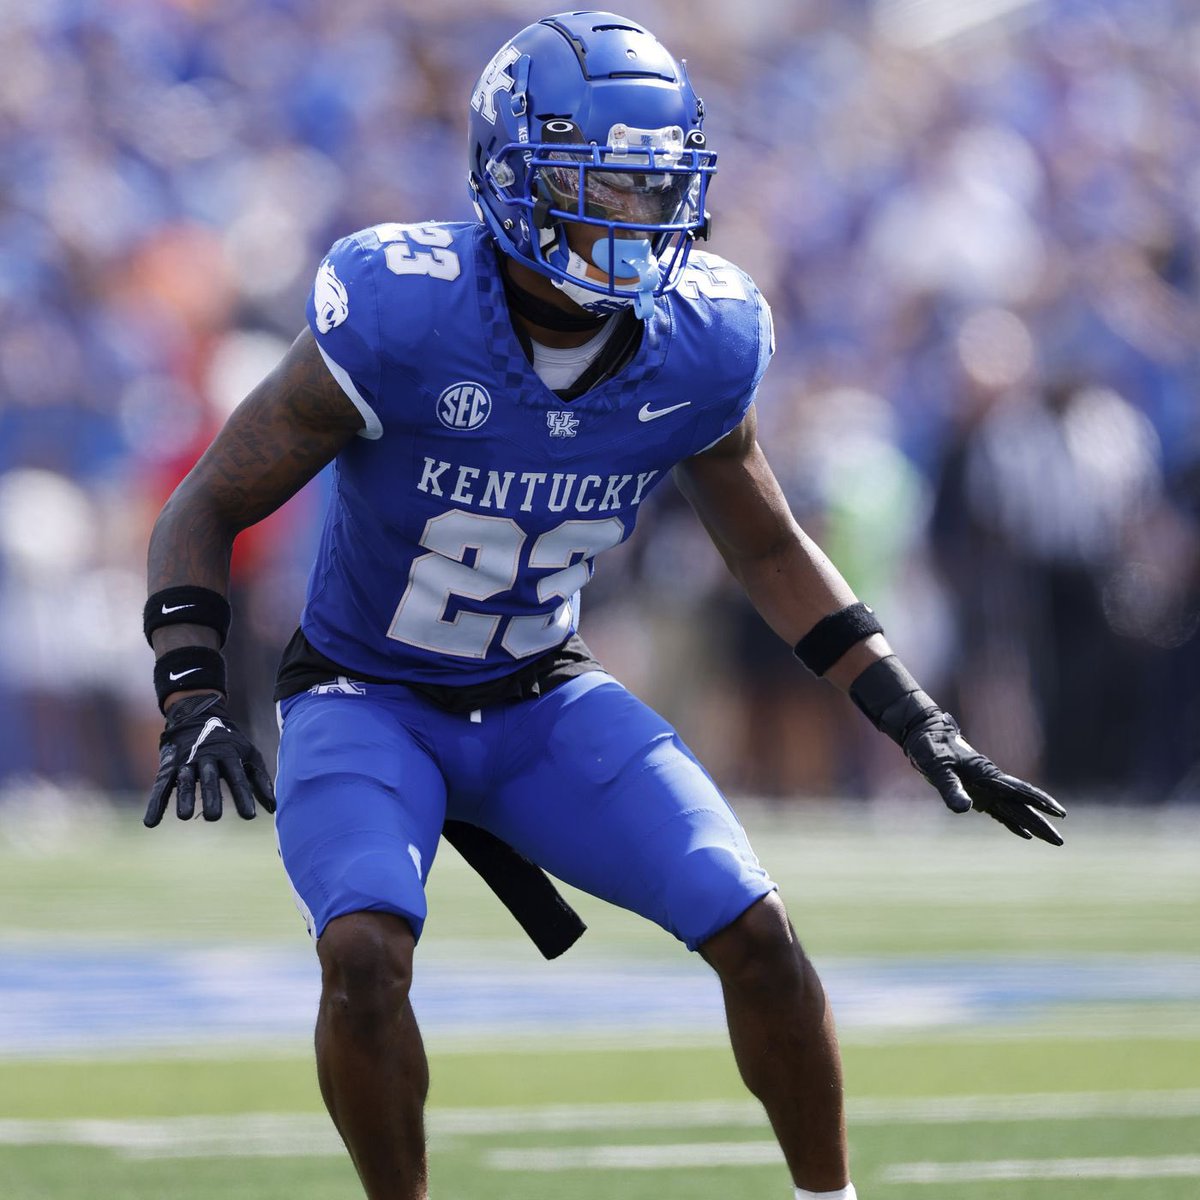 #Kentucky CB Andru Phillips visits the #Bears, #Texans and #49ers this week, wrapping up a slate of visits that included the #Steelers, #AZCardinals, #Giants, #Eagles, #Lions and #Bills. A likely second-round pick, though some evaluators have first-round grades on him.